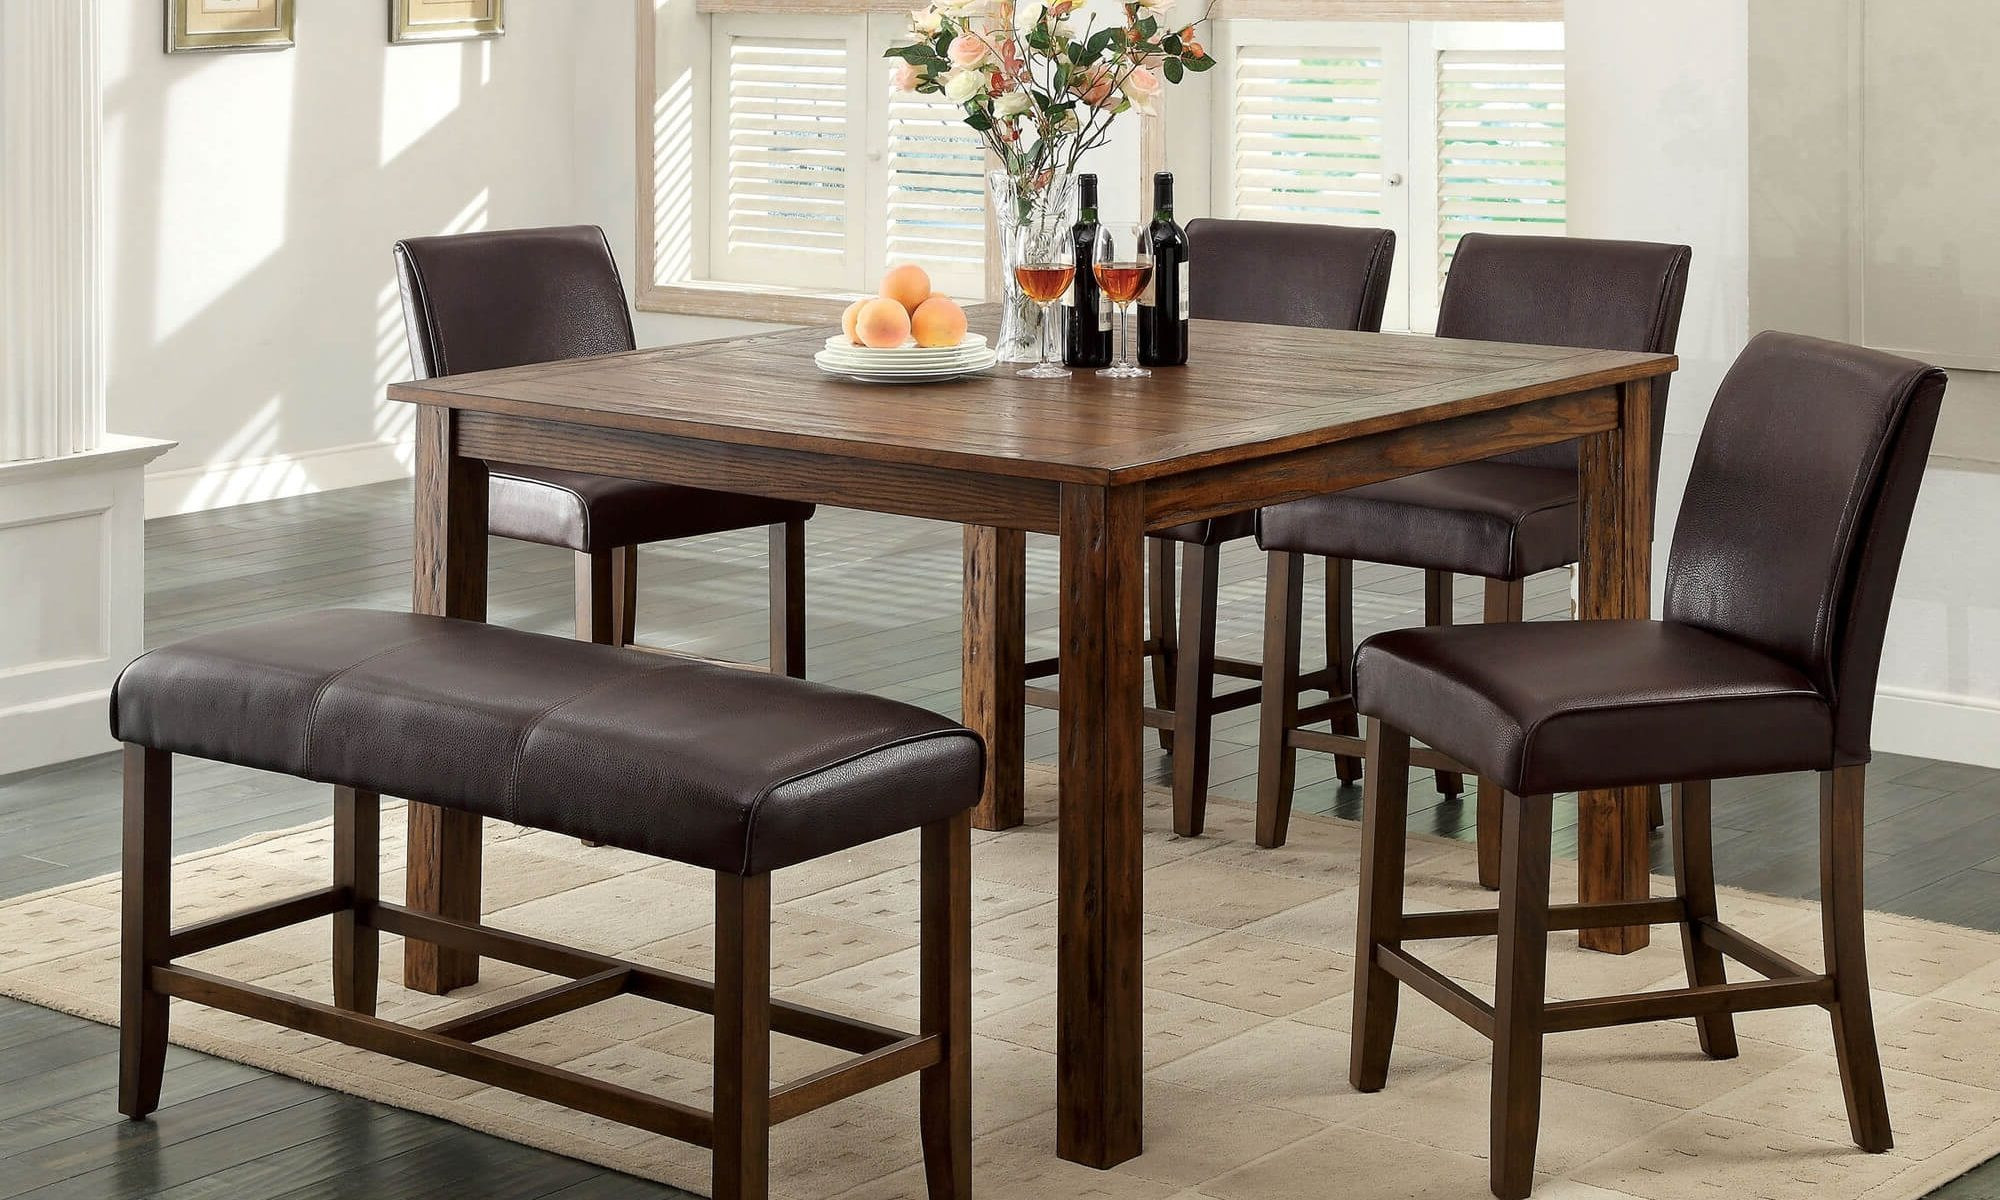 Harveys Dining Table And Chairs Elegant Room Furniture Dallas Tables ...